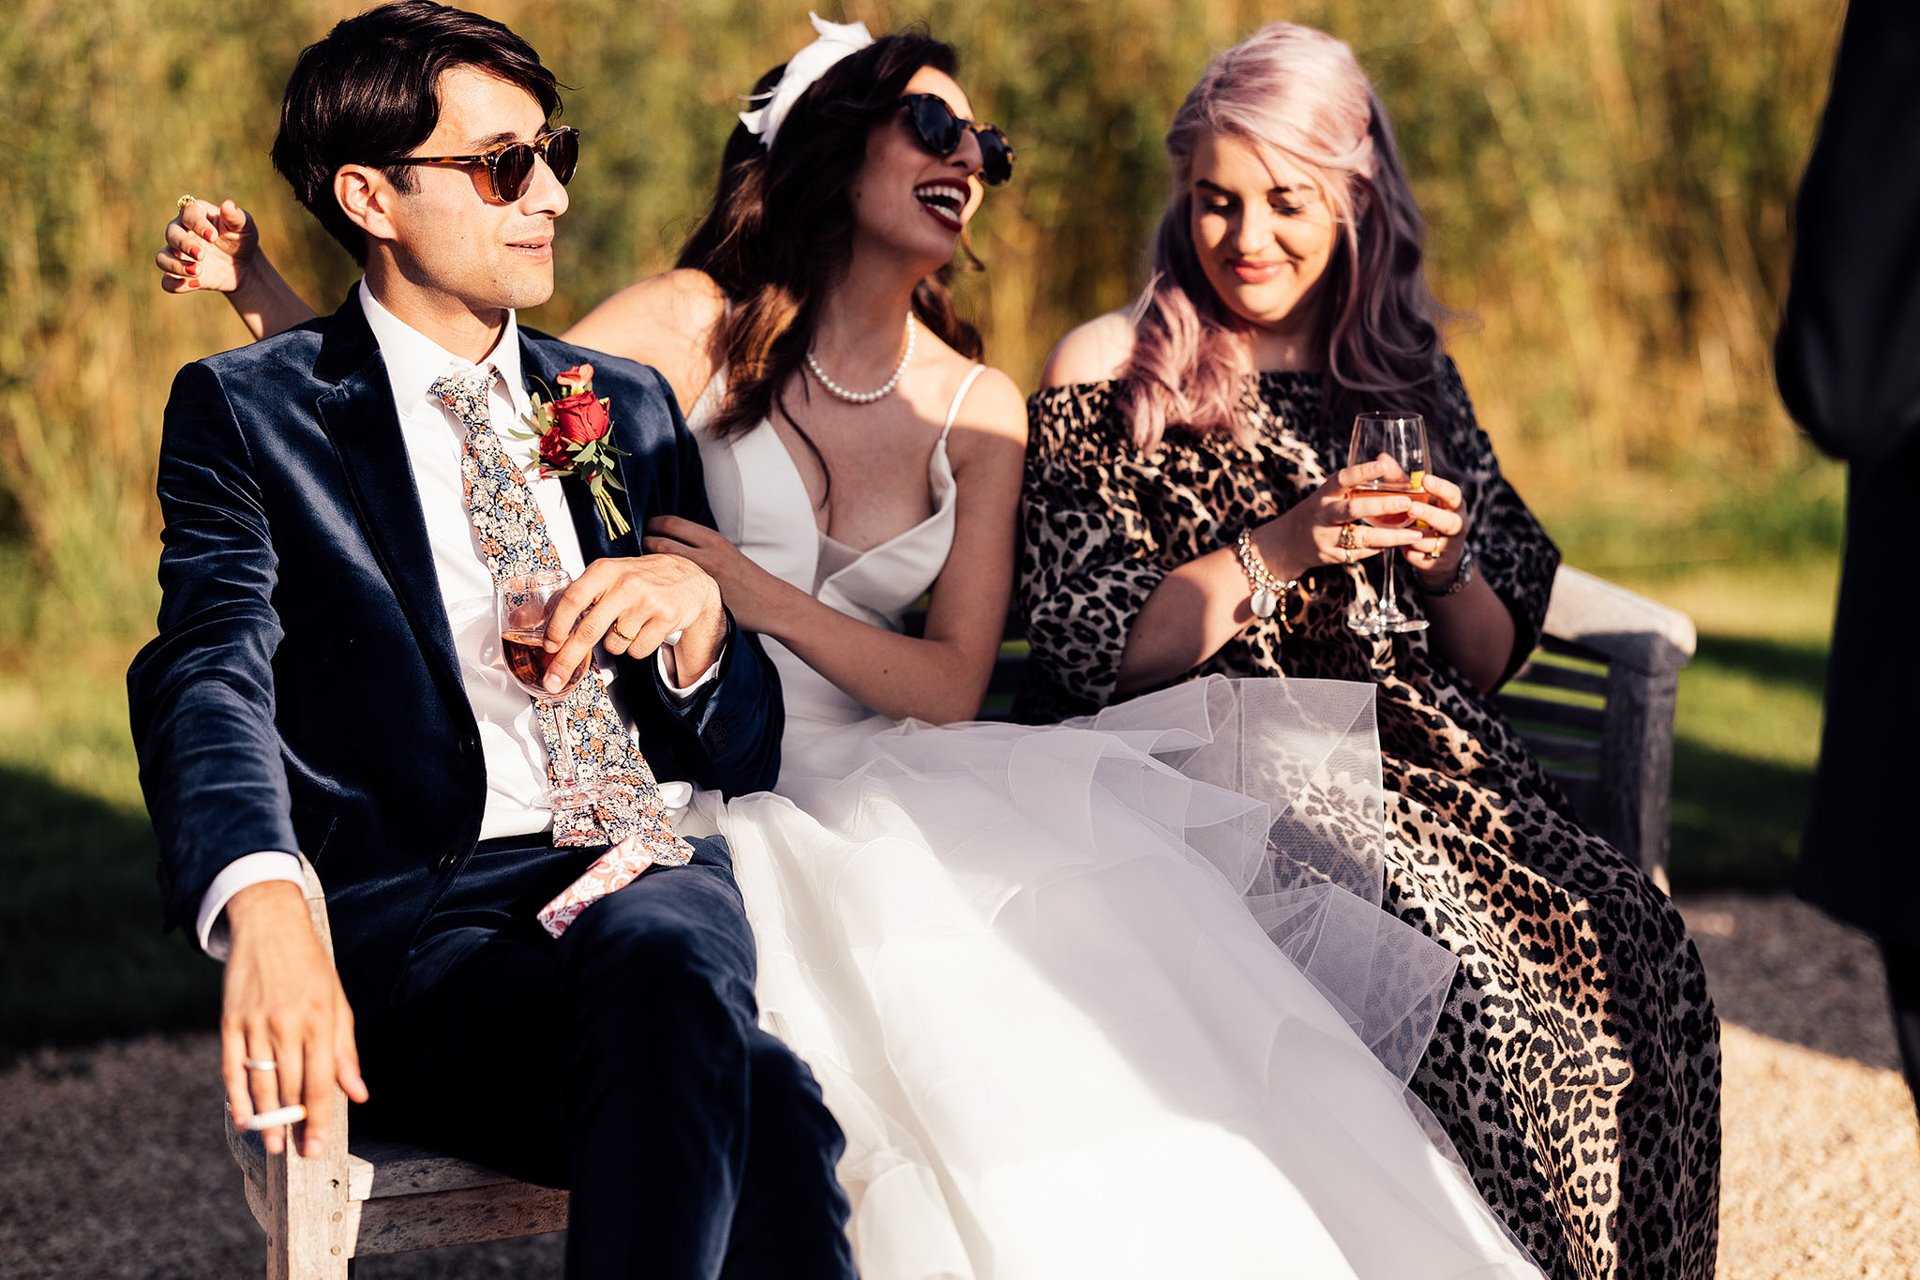 Beautiful bride and groom wearing sunglasses sit outside their wedding venue. Groom in blue velvet suit and bride in princess dress and designer headpiece